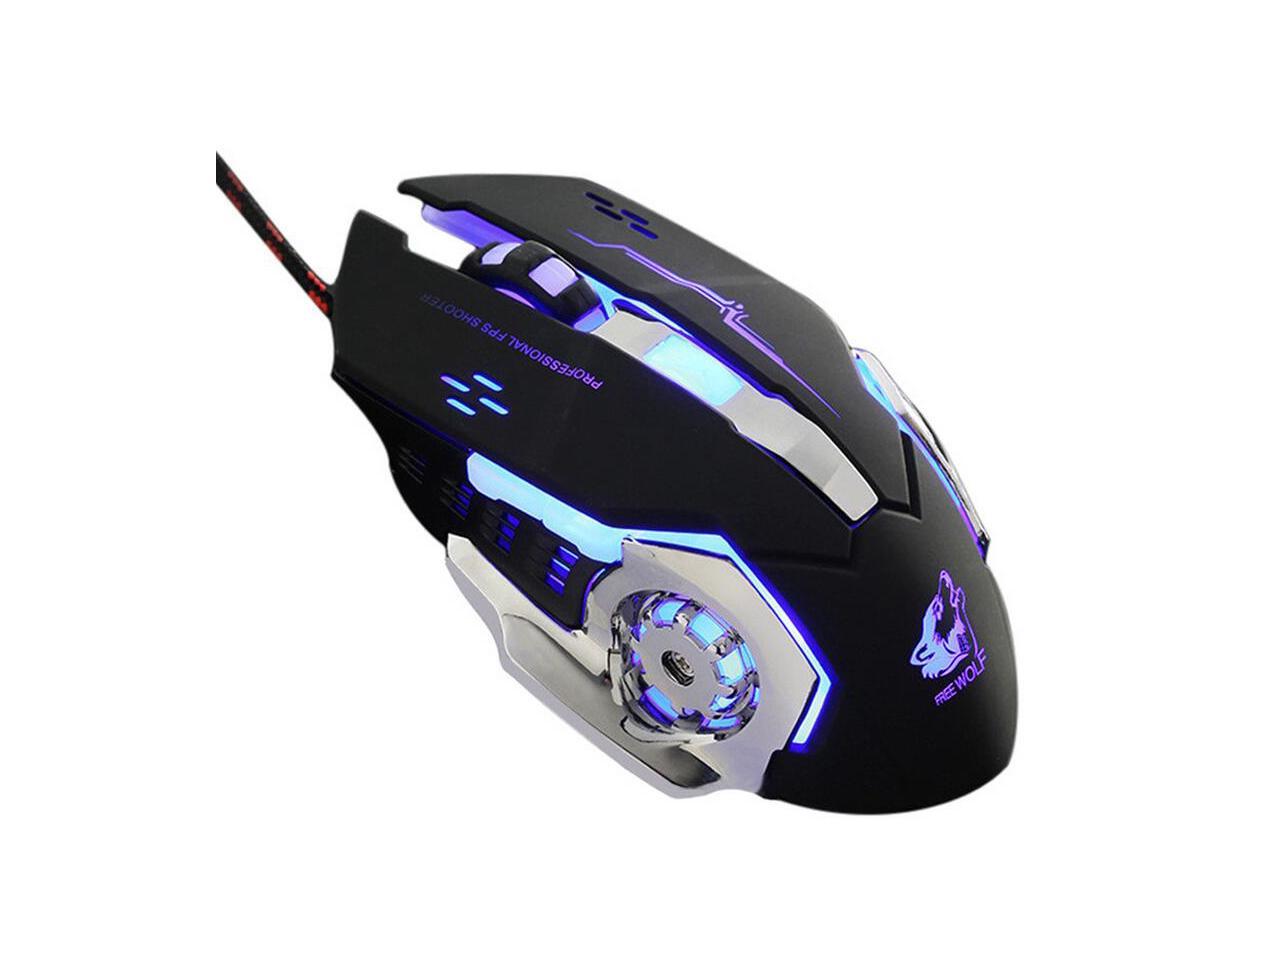 Professional Upgrade X9 LED Optical 5000DPI USB Wired Game Gaming Mouse For PC computer Laptop Home Office Use 4000DPI